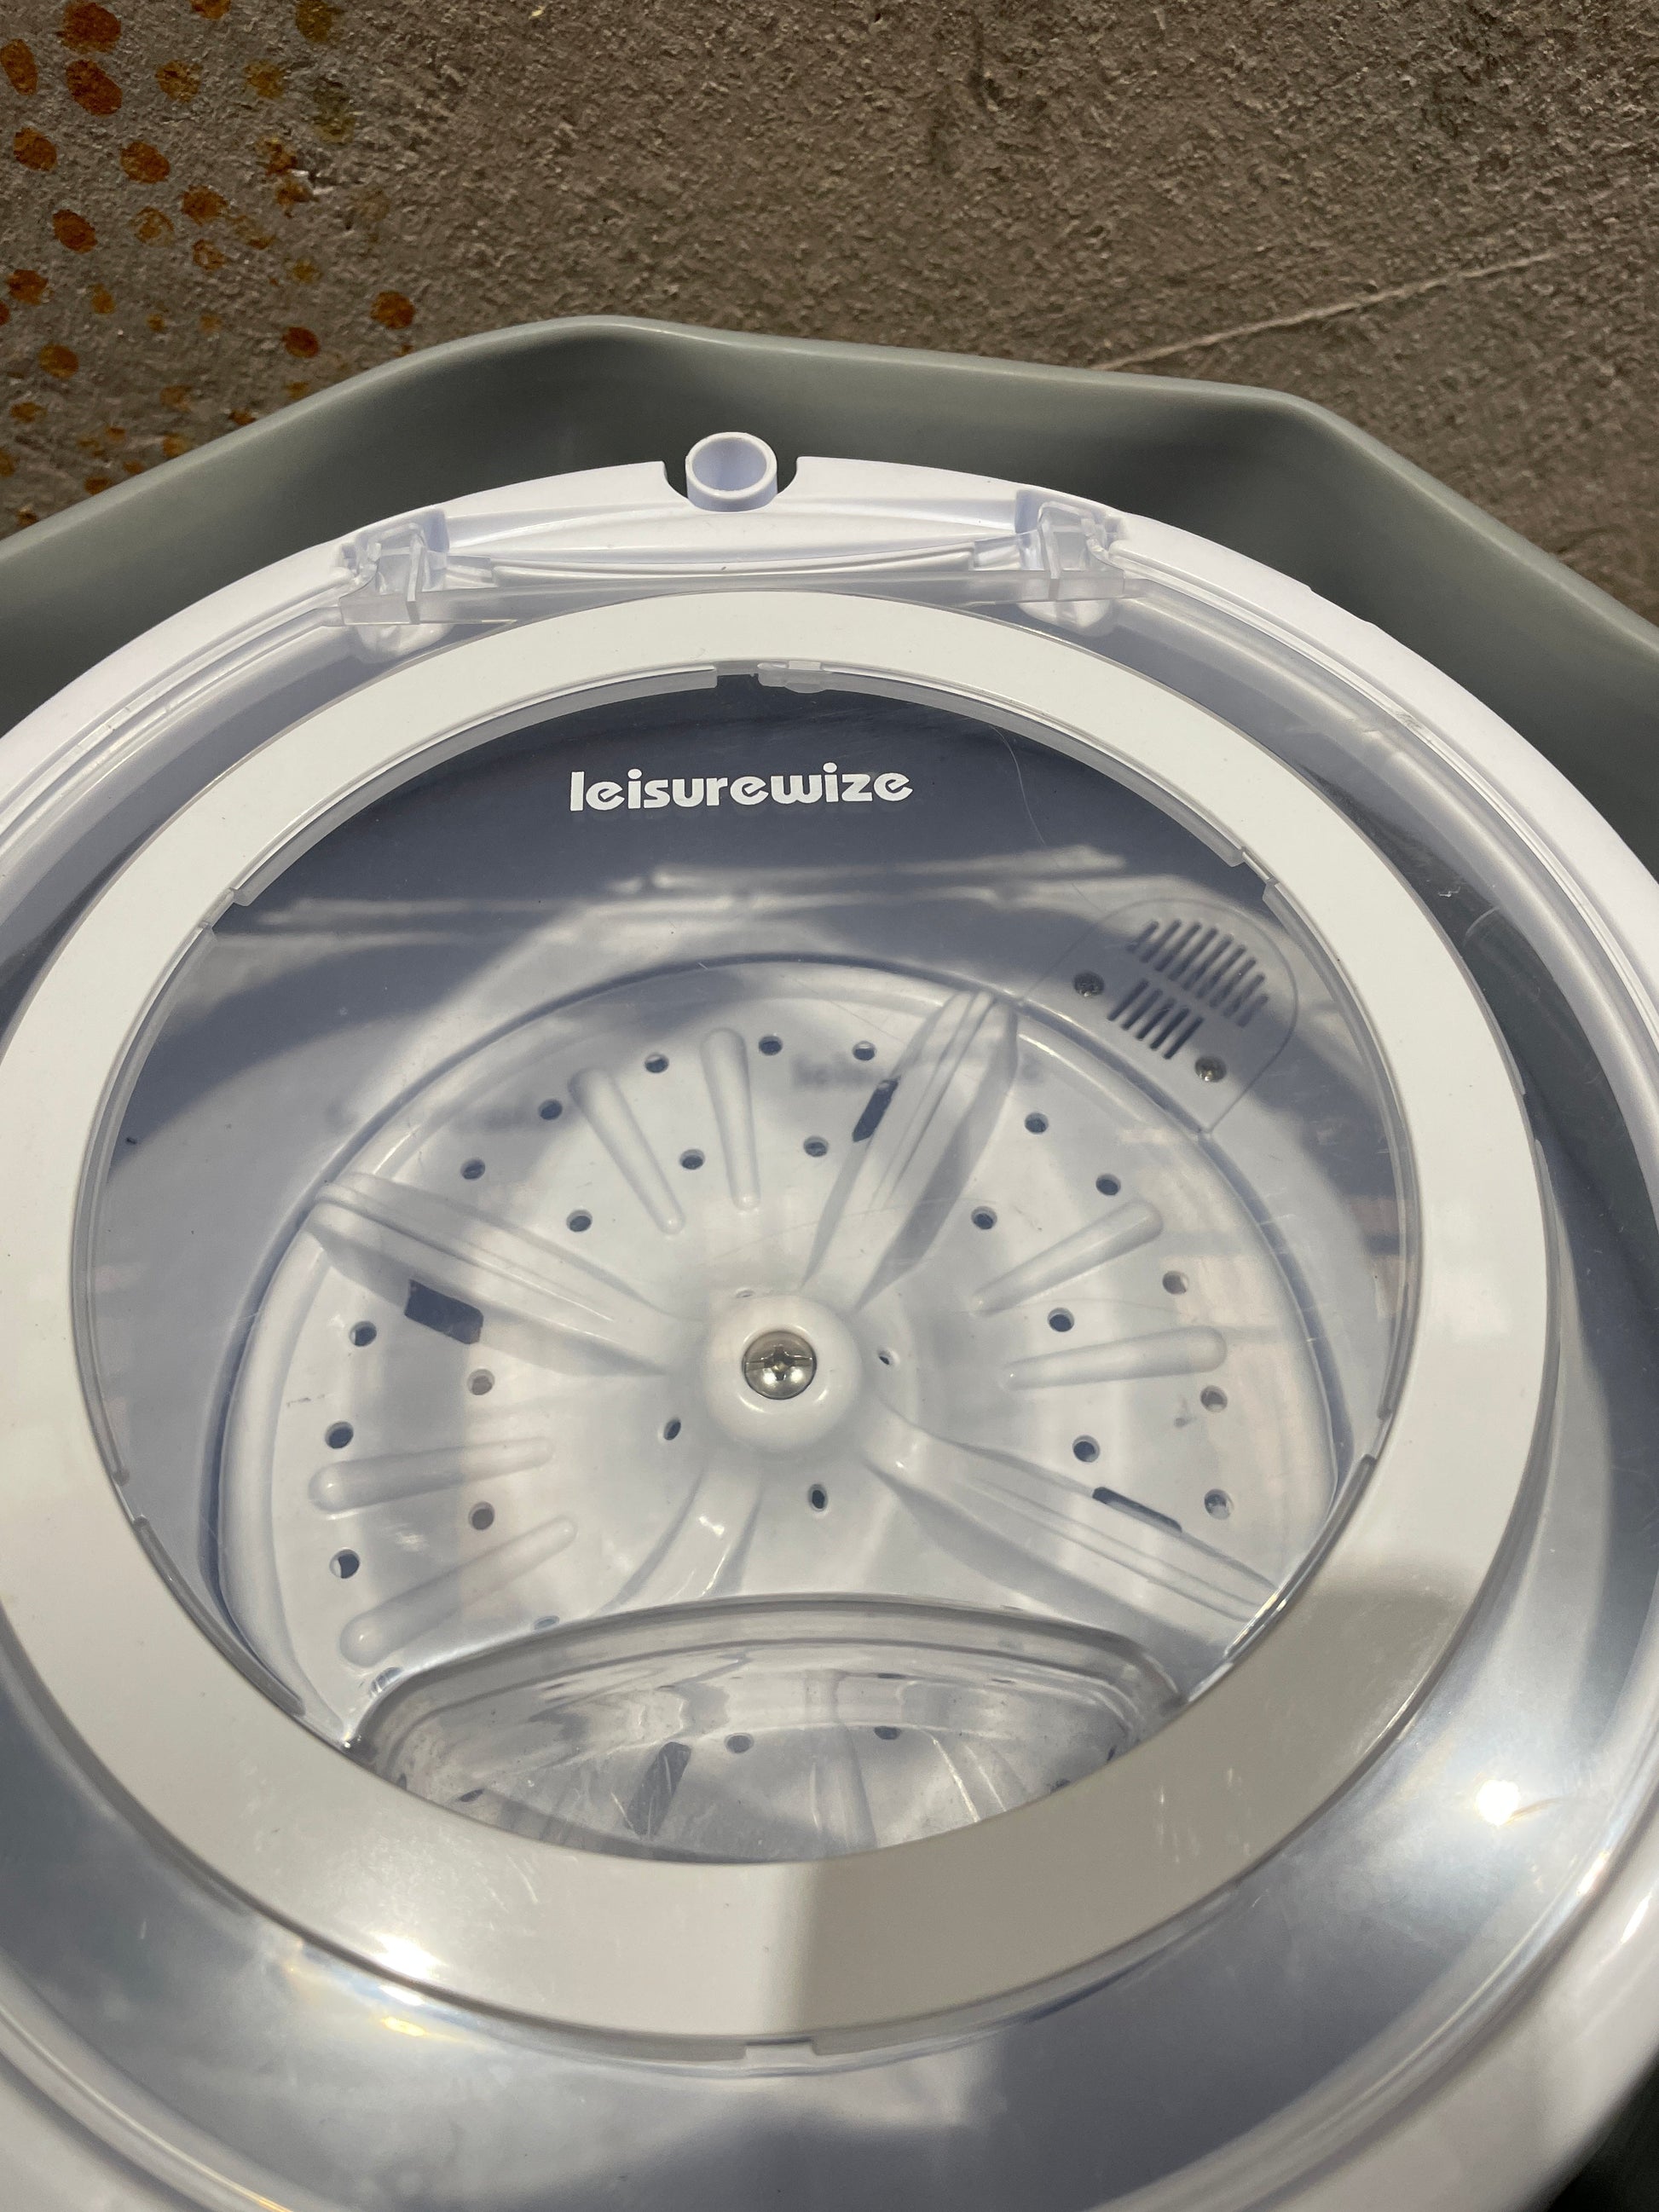 Leisurewize Collapsible Washing Machine (Pre-Loved) Renew Greater Manchester